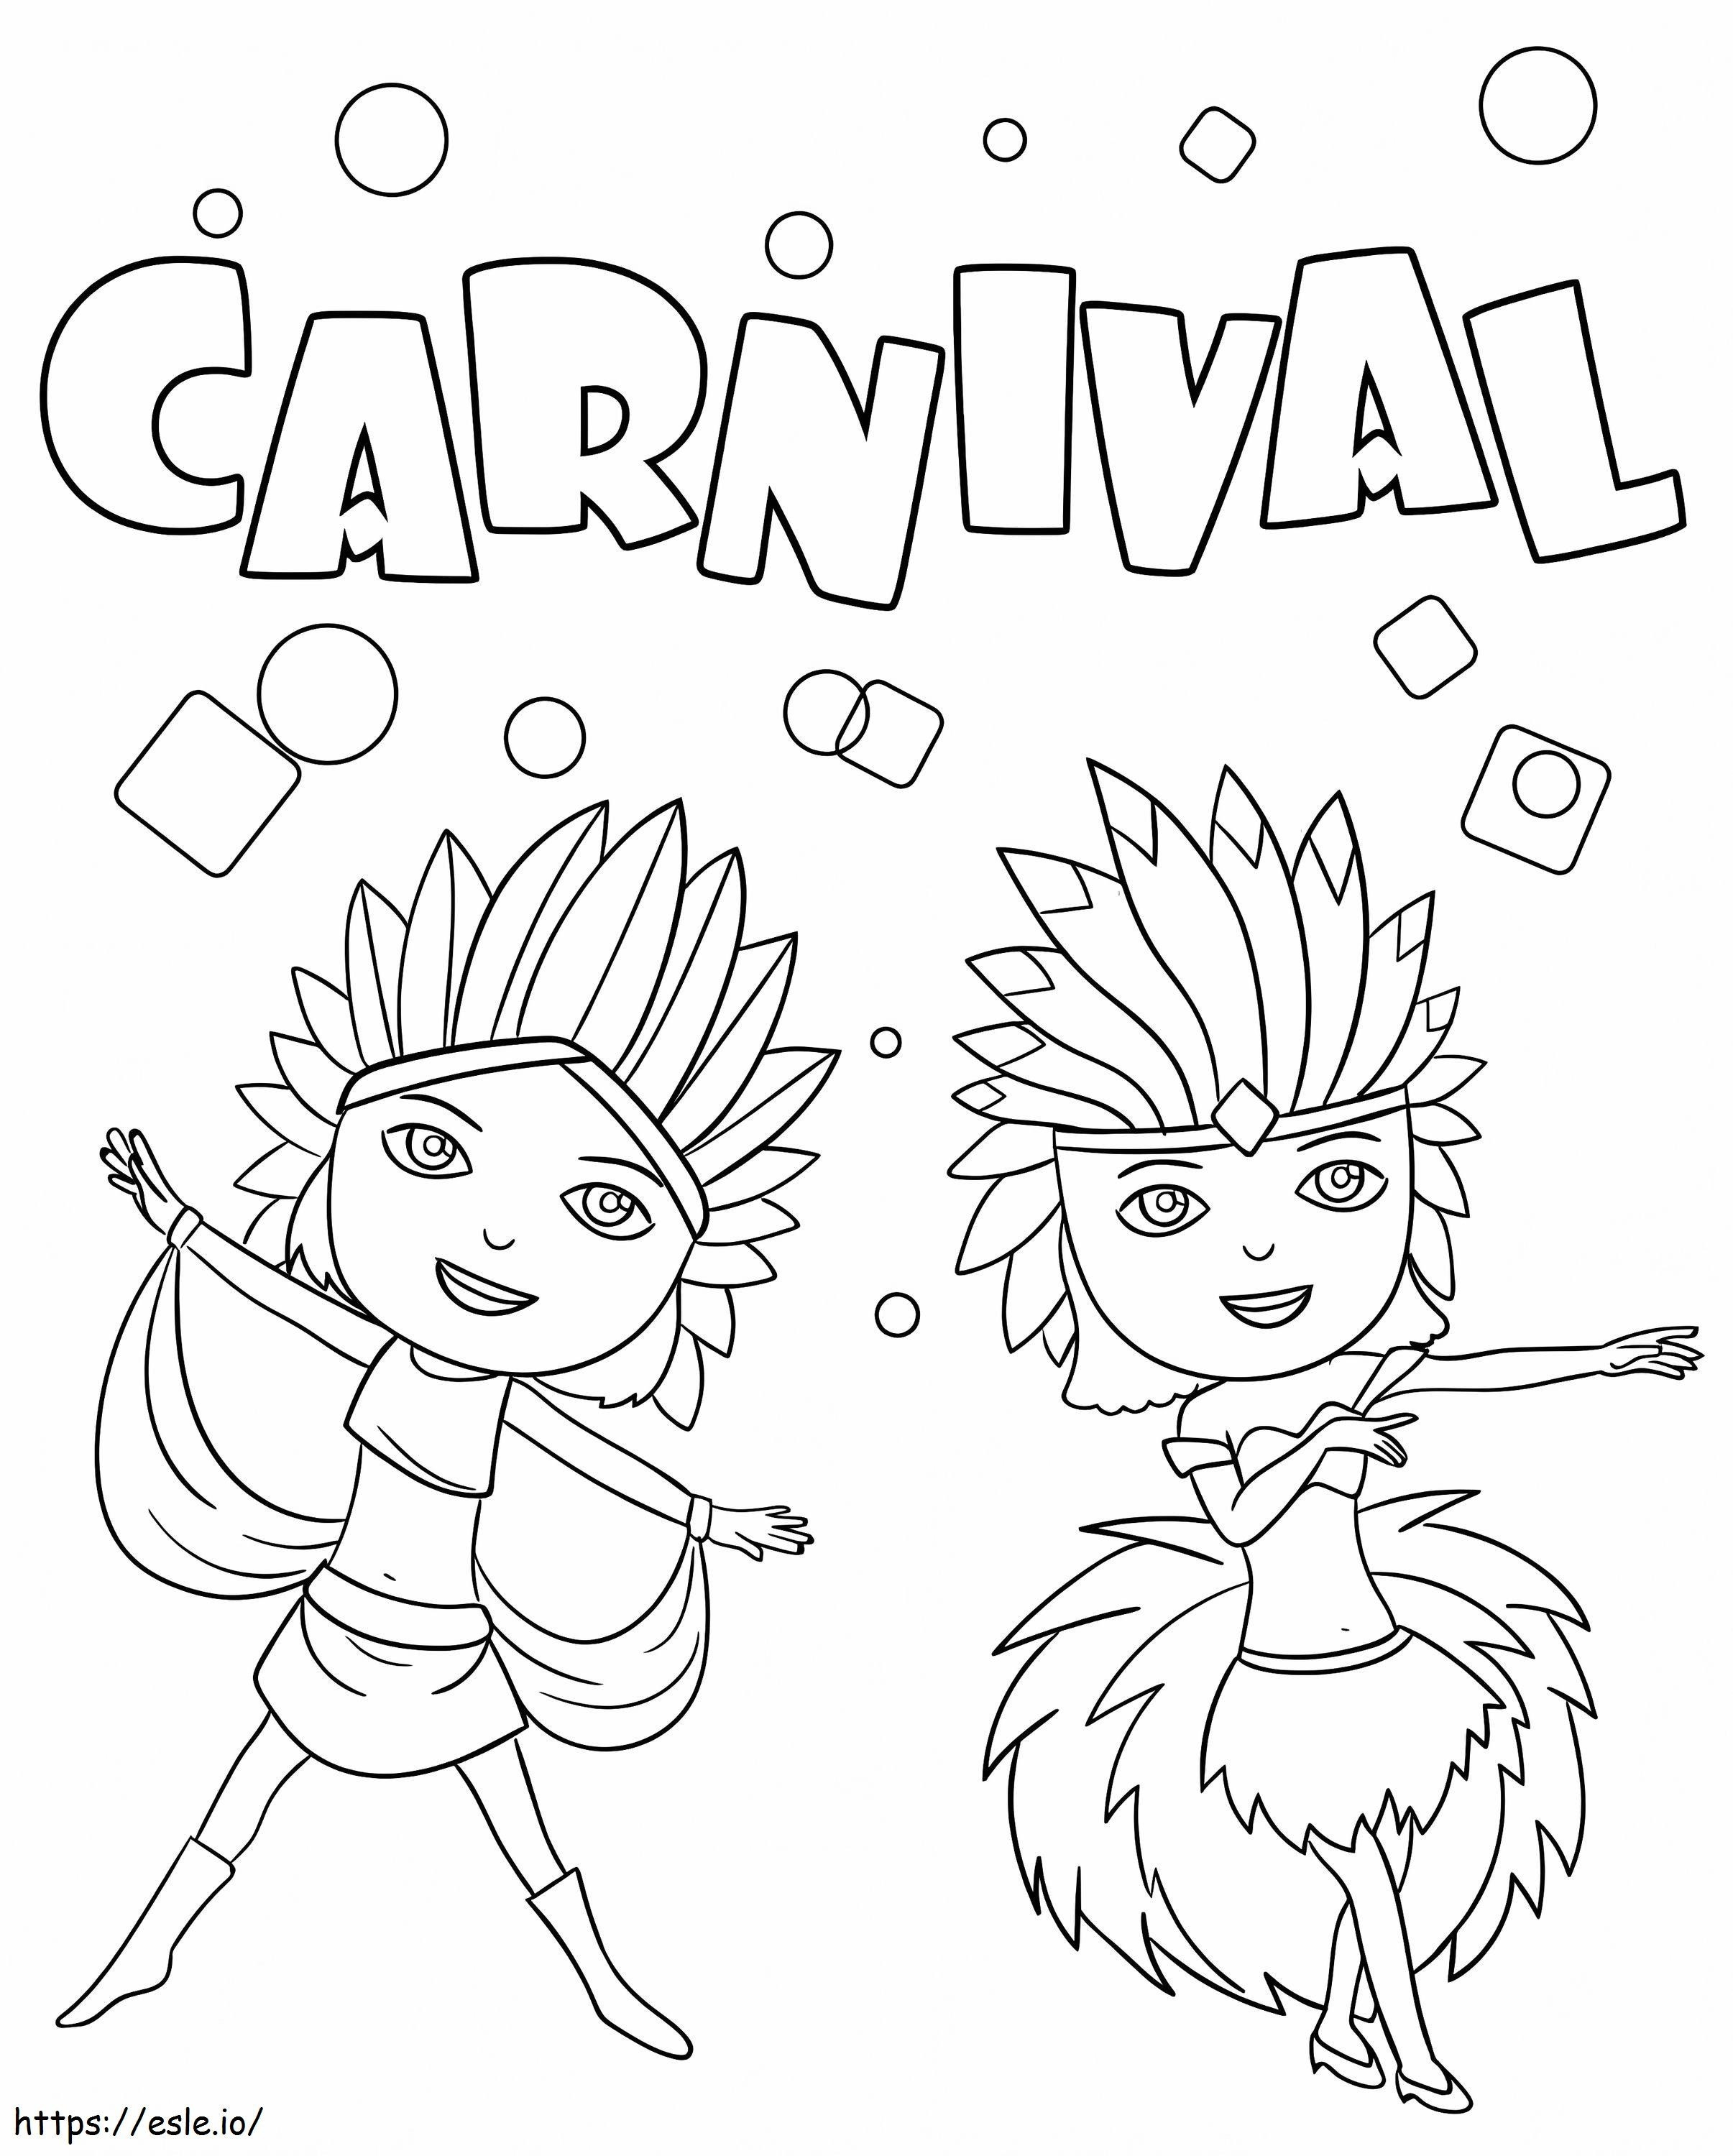 Cute Carnival coloring page